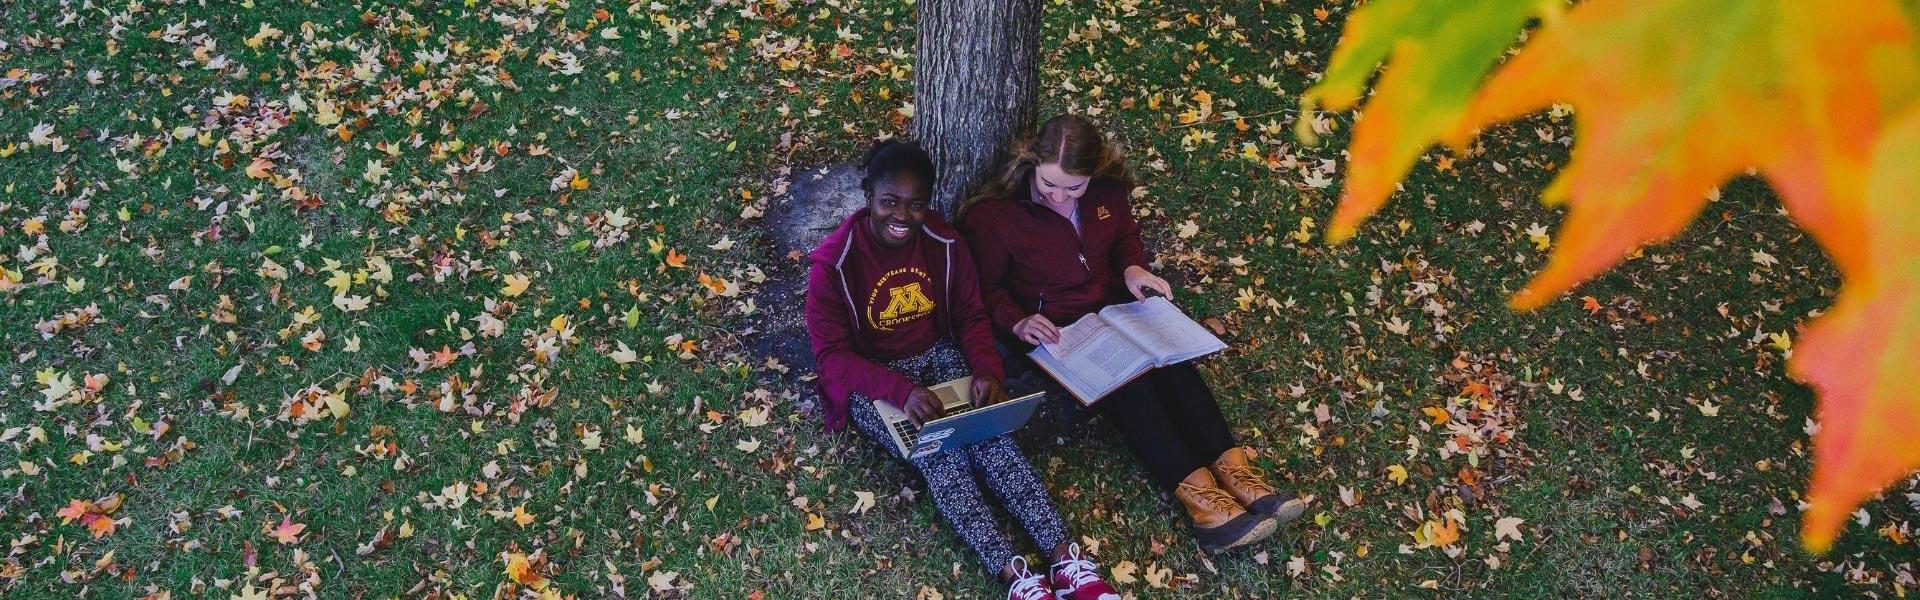 Two students sitting outside near a tree with falling fall colored leaves